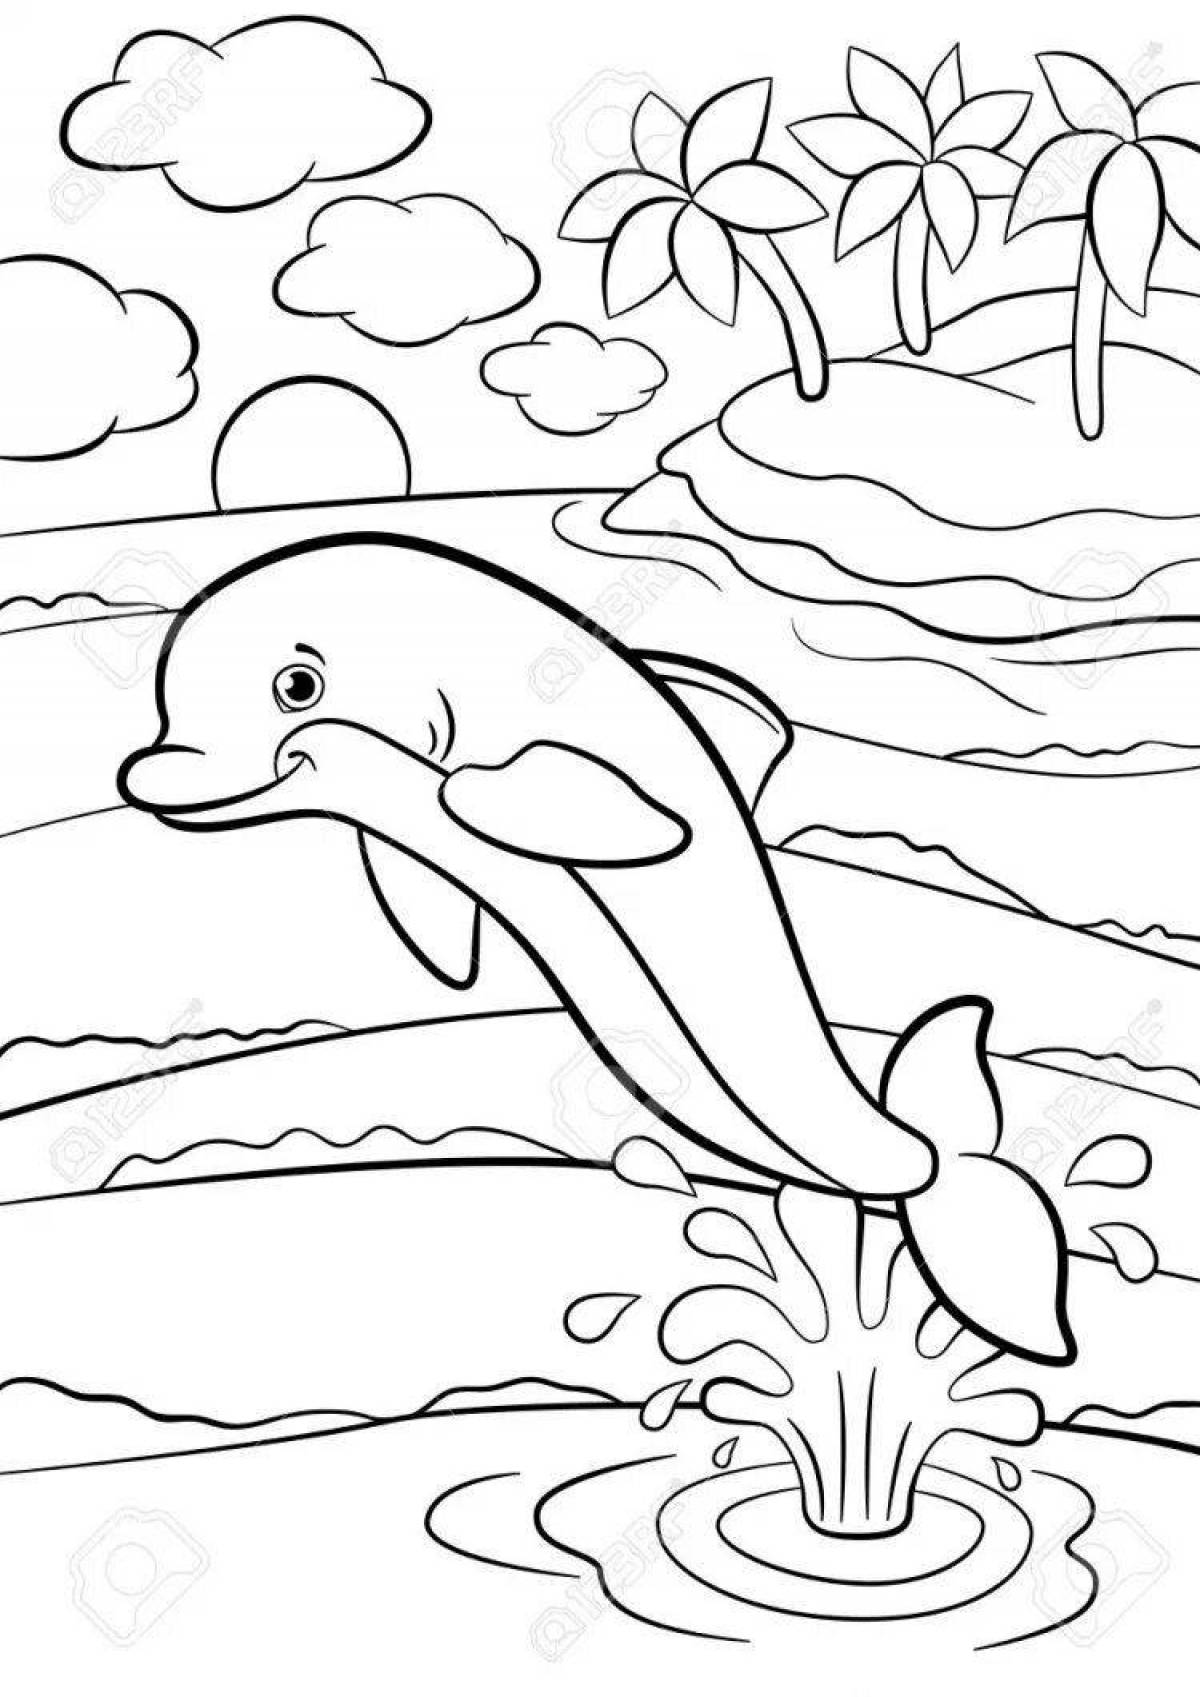 Refreshing dolphin coloring page